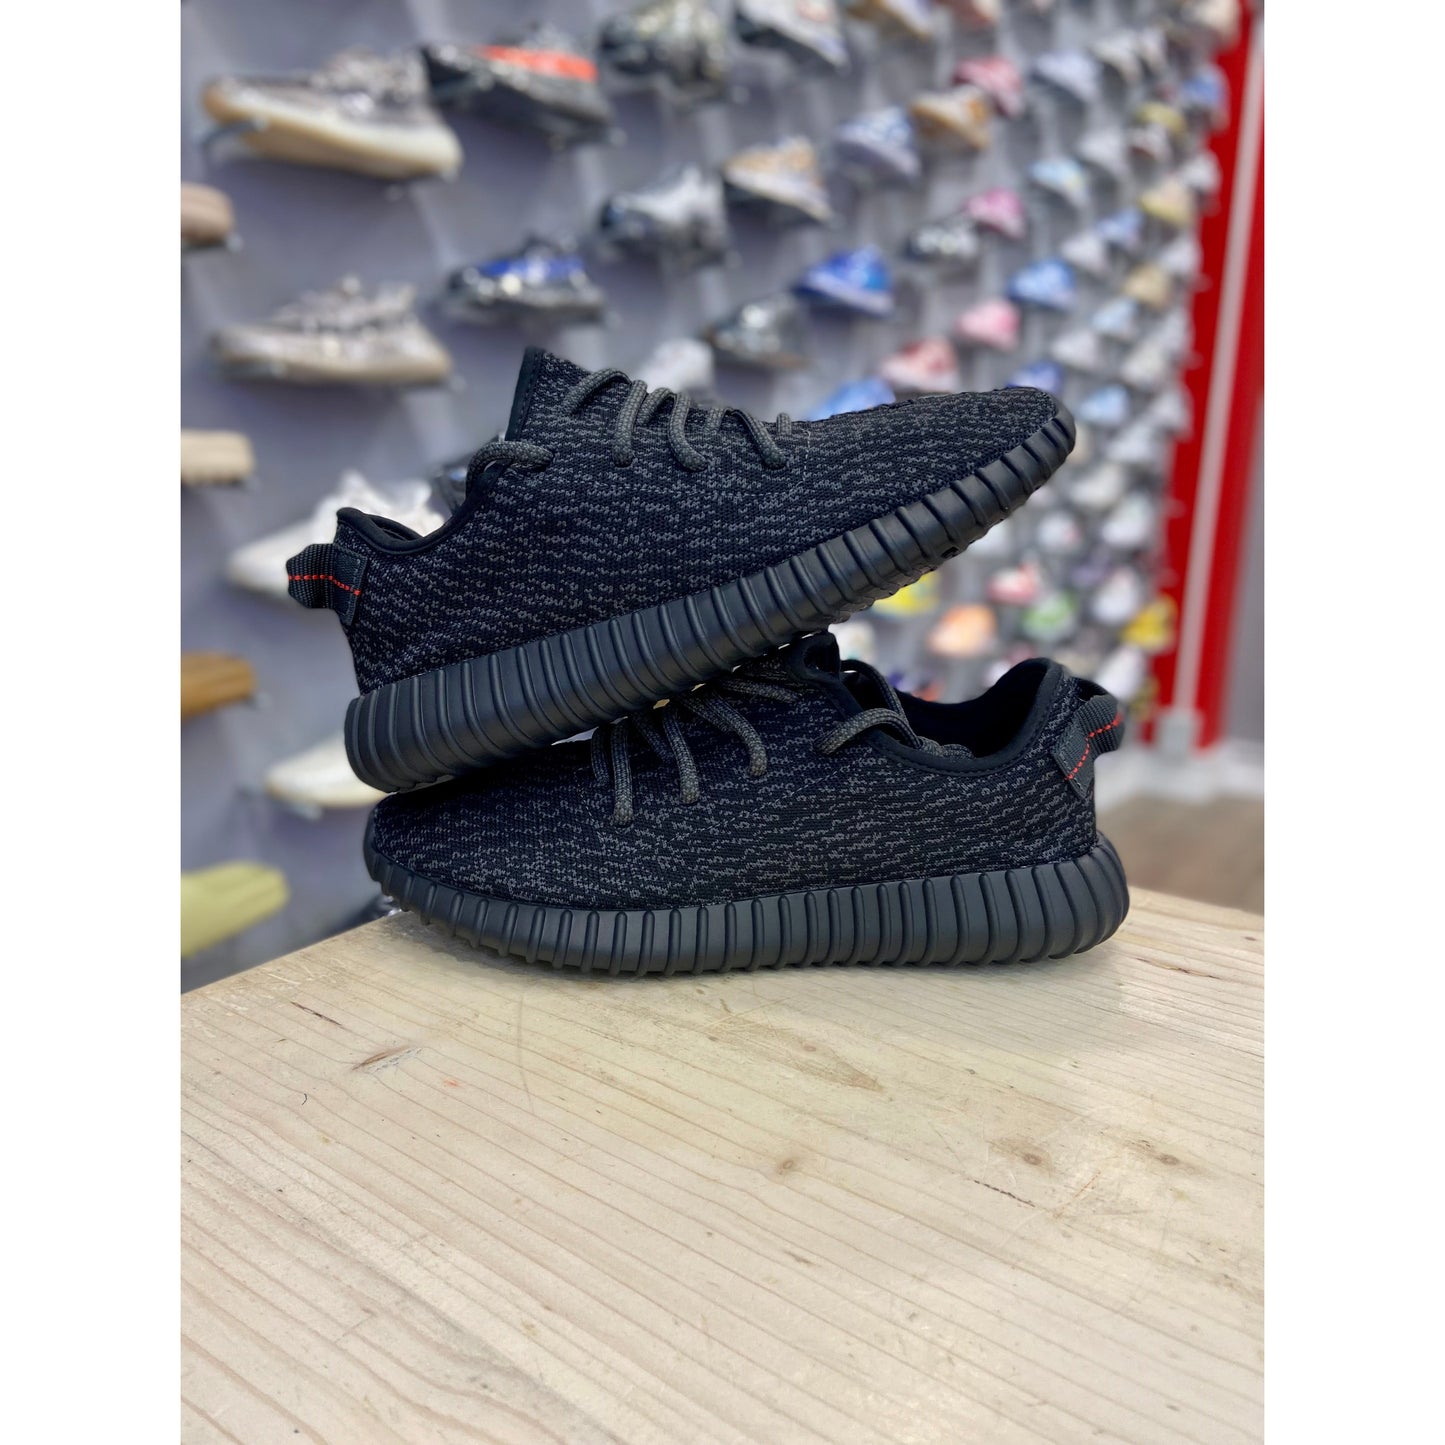 Yeezy Boost 350 Pirate Black (2023) from Yeezy